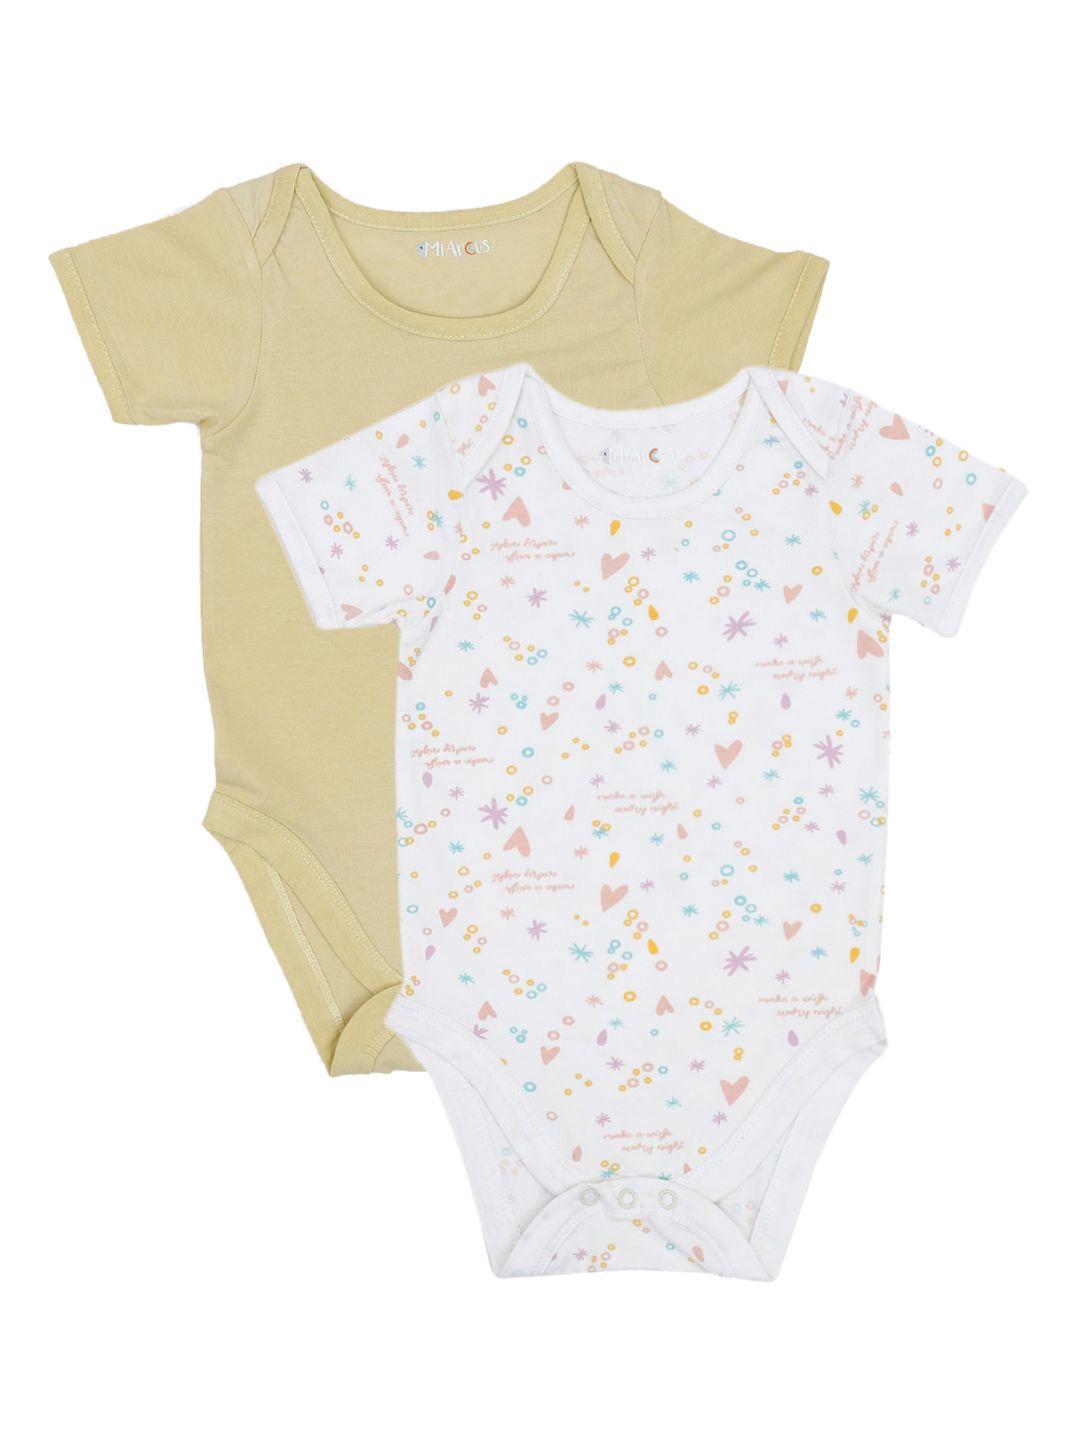 miarcus kids off-white & beige pack of 2 rompers